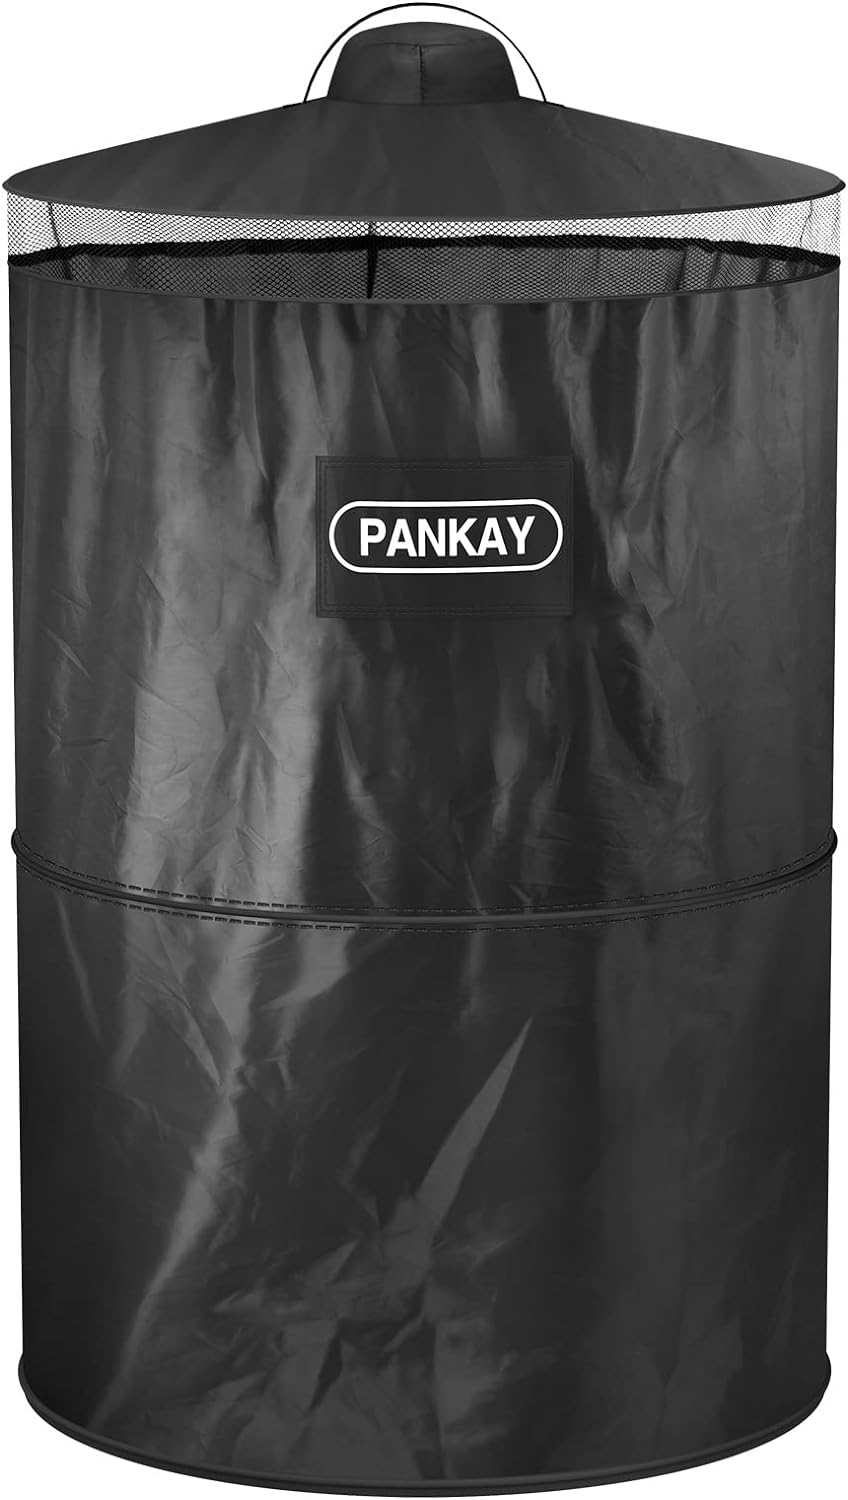 Pankay Pop Up Privacy Tent Review